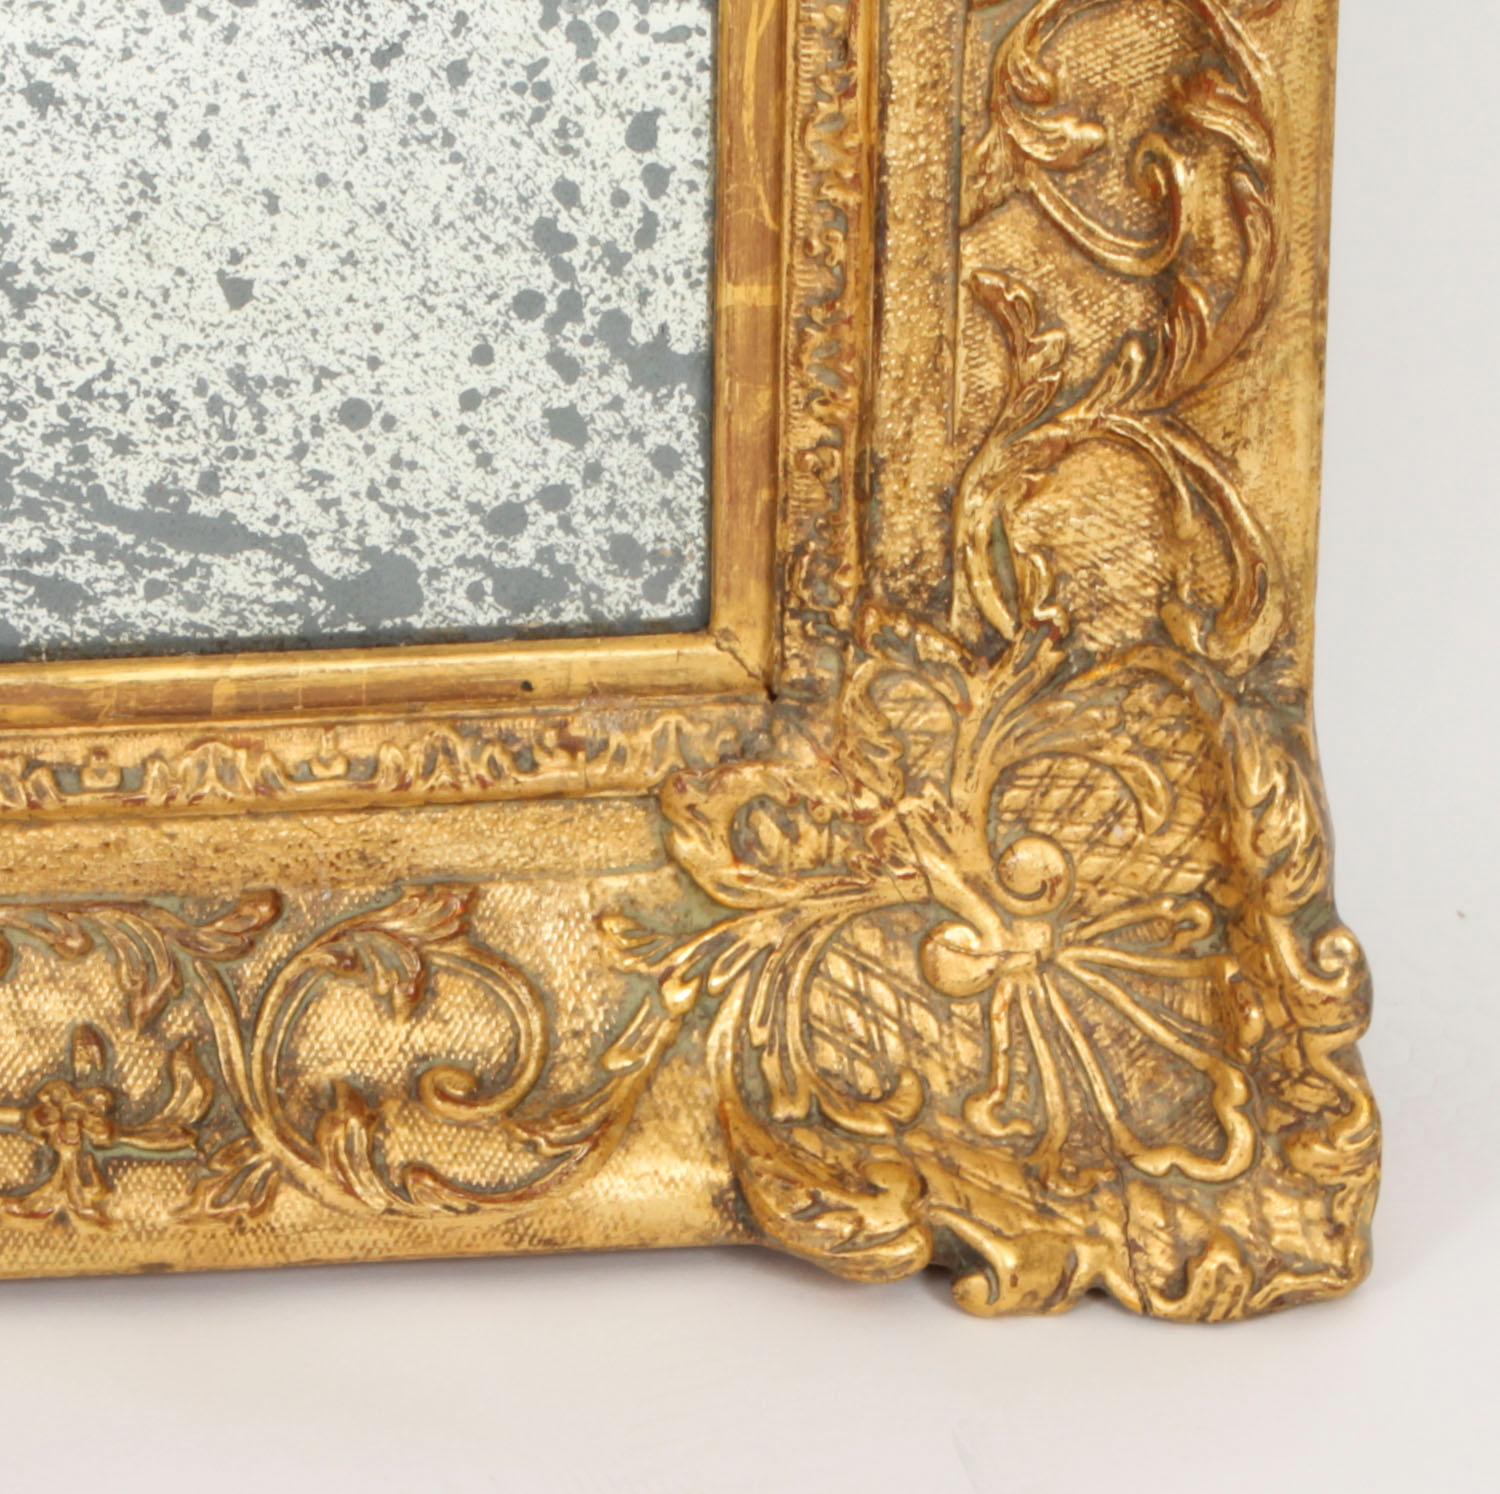 Antique Large French Giltwood Wall Mirror 18th Century - 171x101cm For Sale 5